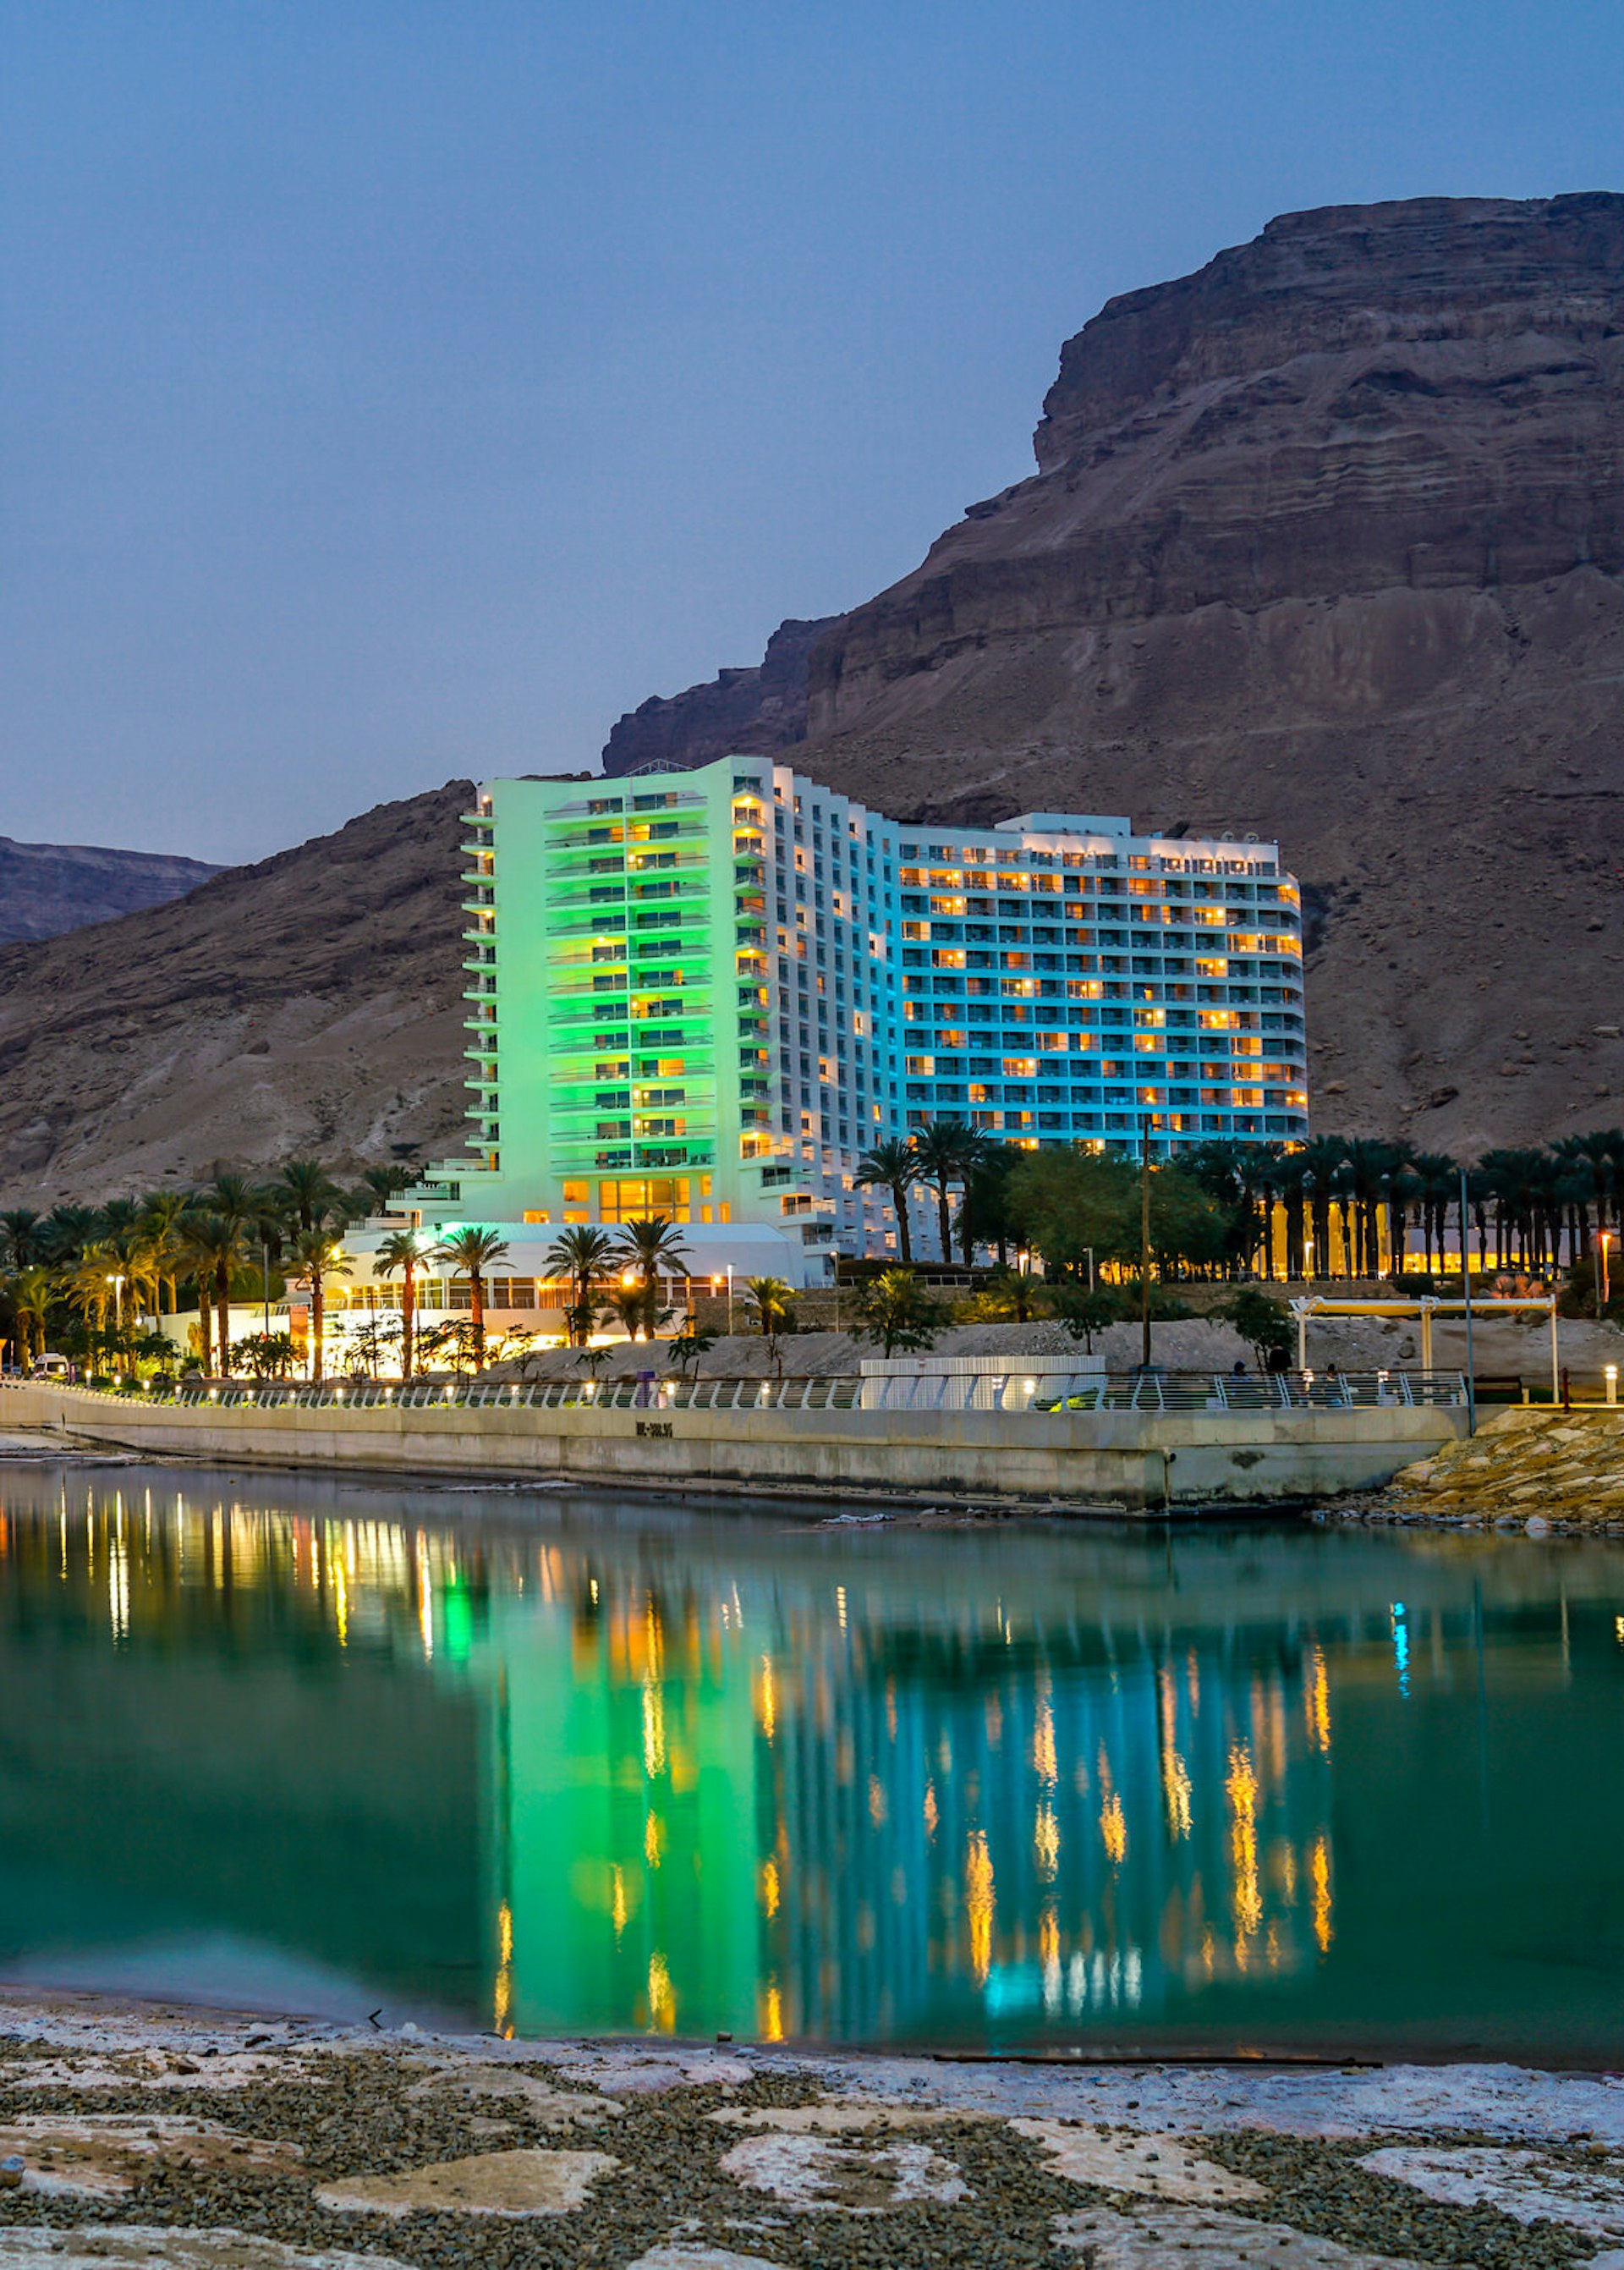 A white hotel resort glows green in mood lighting; it's backed by steep rocky cliffs and is fronted by the waters of the Dead Sea.